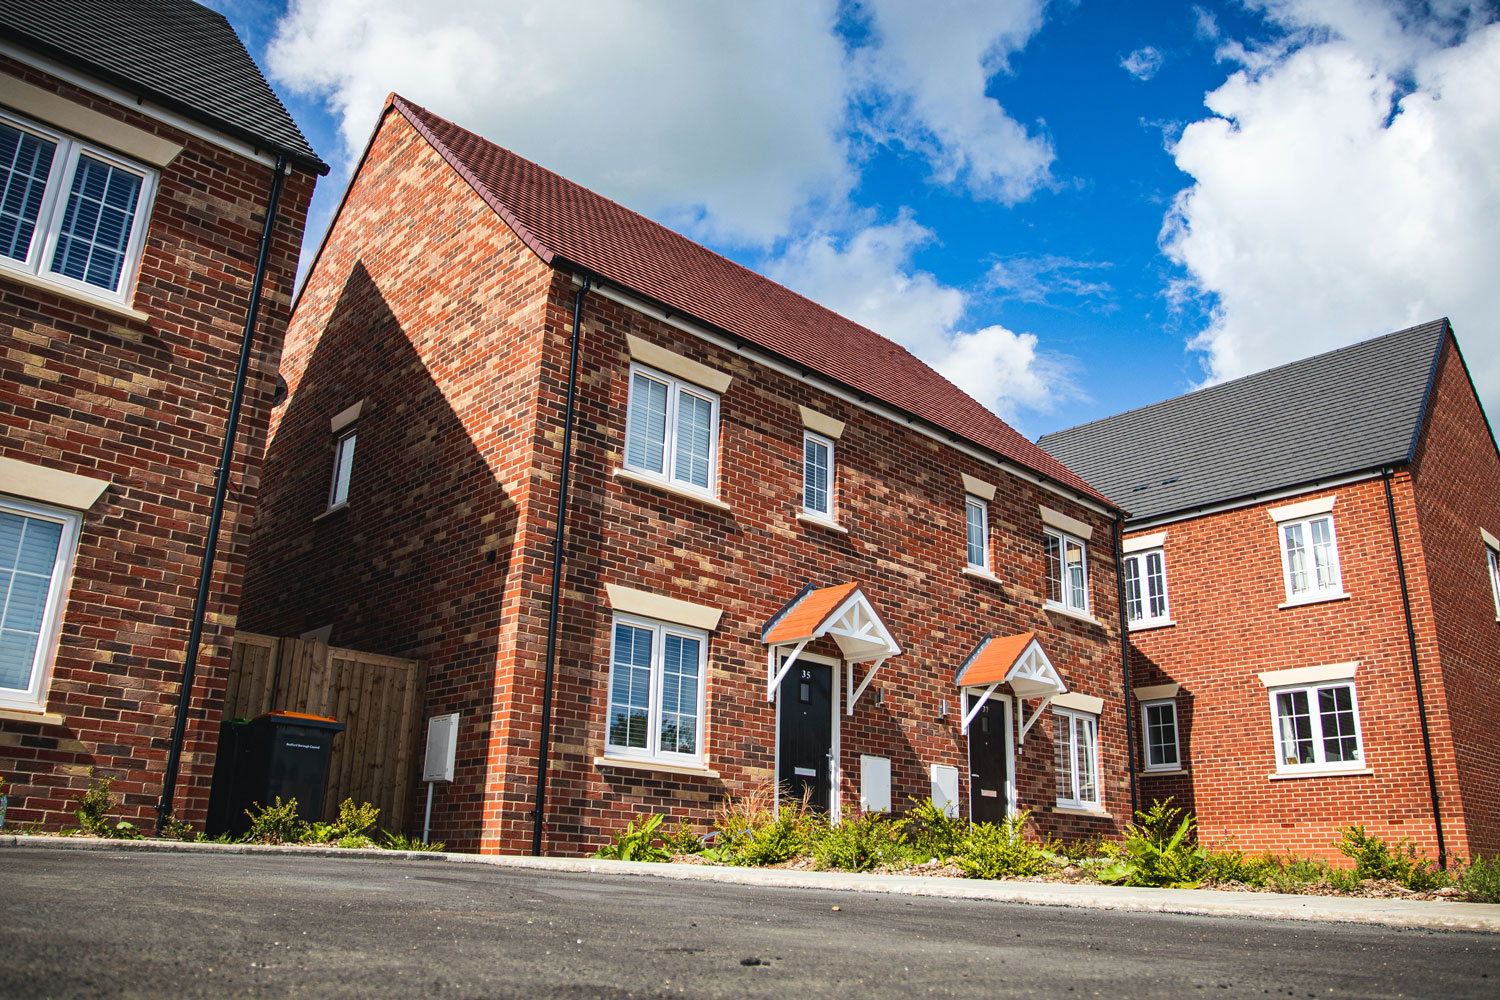 new affordable housing following a multimillion-pound investment